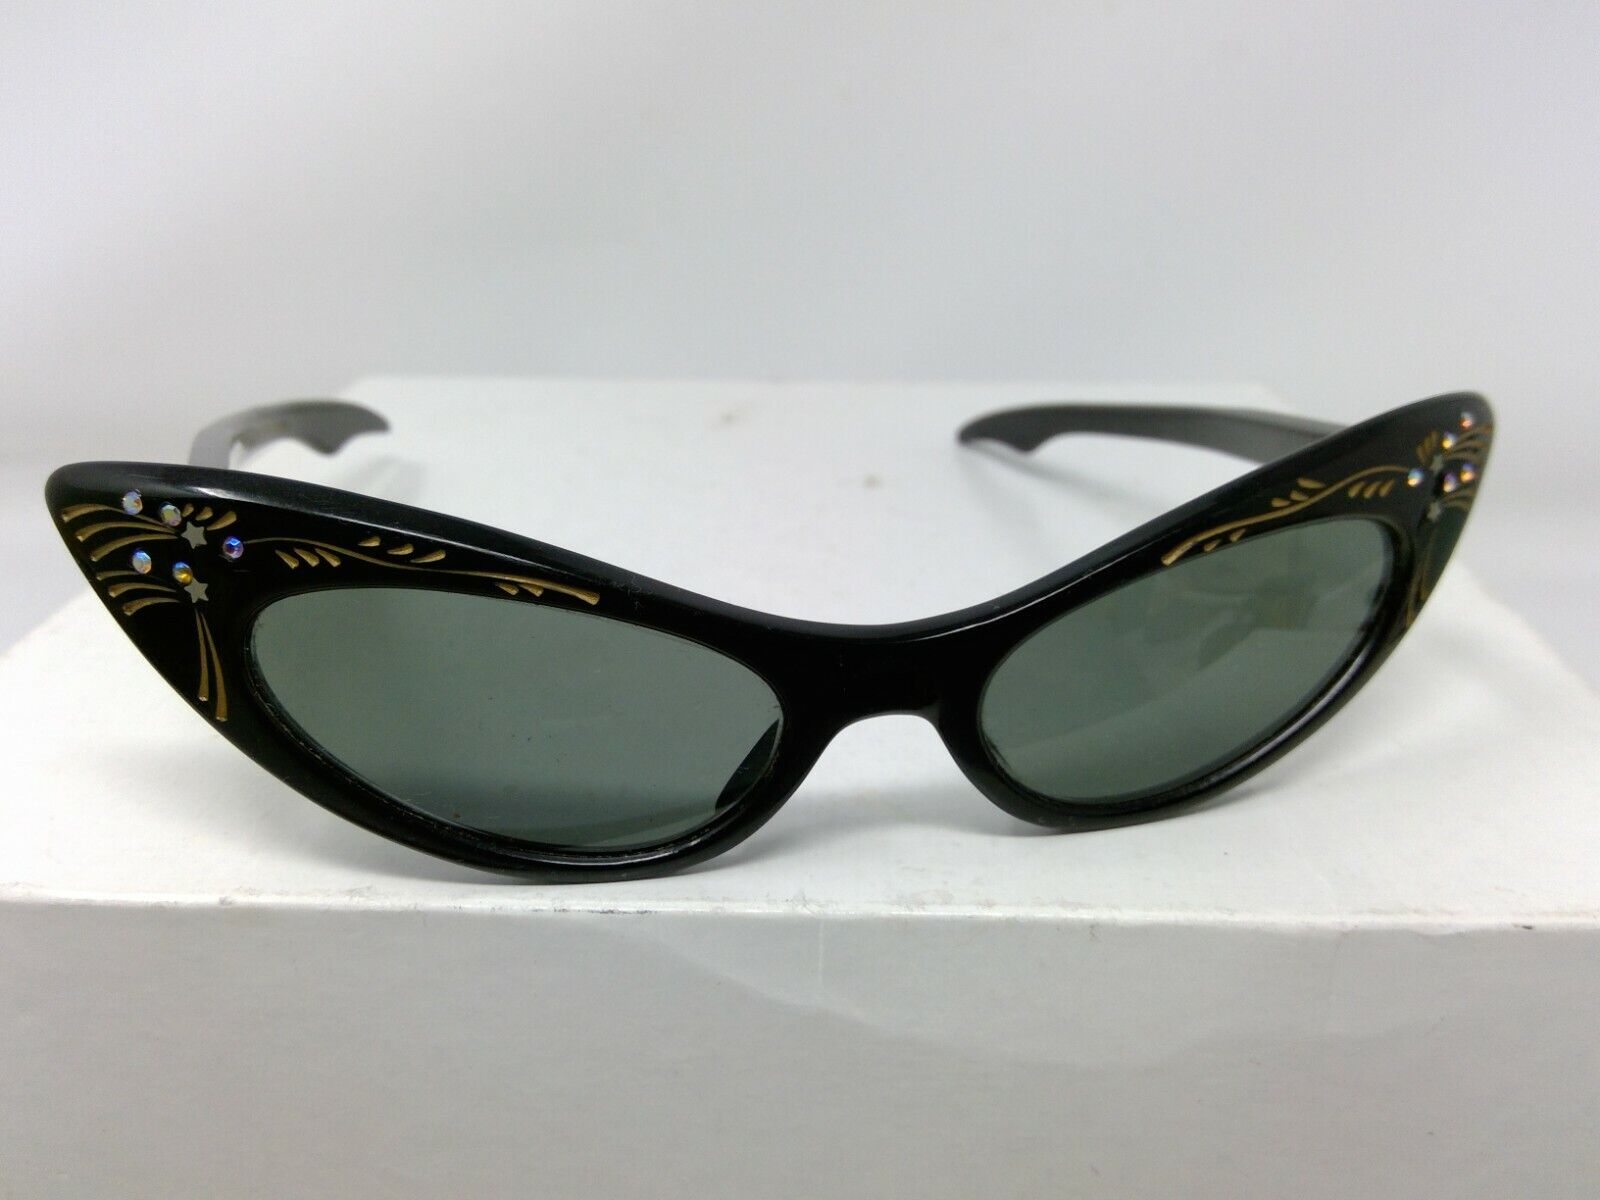 Vintage Pair of Made in France Black Cat Eye Sunglasses with Iridescent Stones